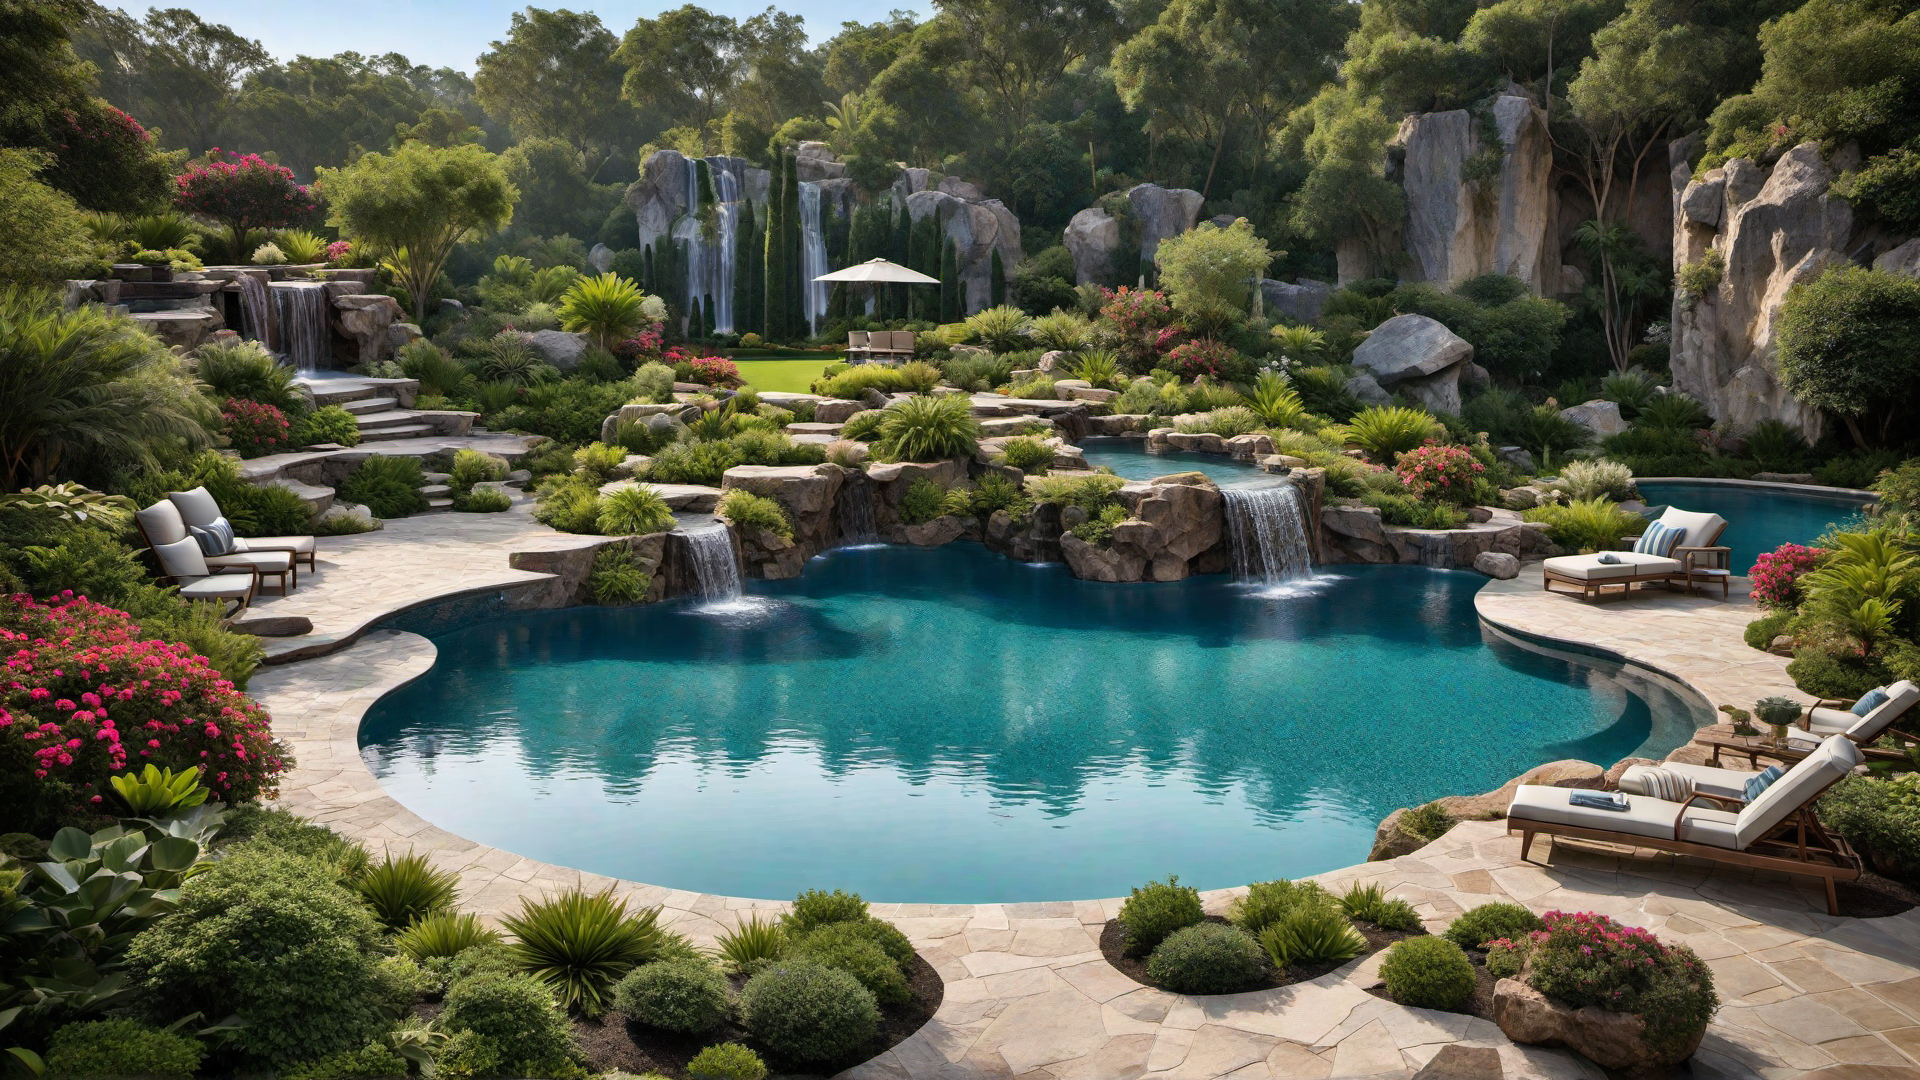 Grotto Style Pool with Hidden Caves and Waterfalls